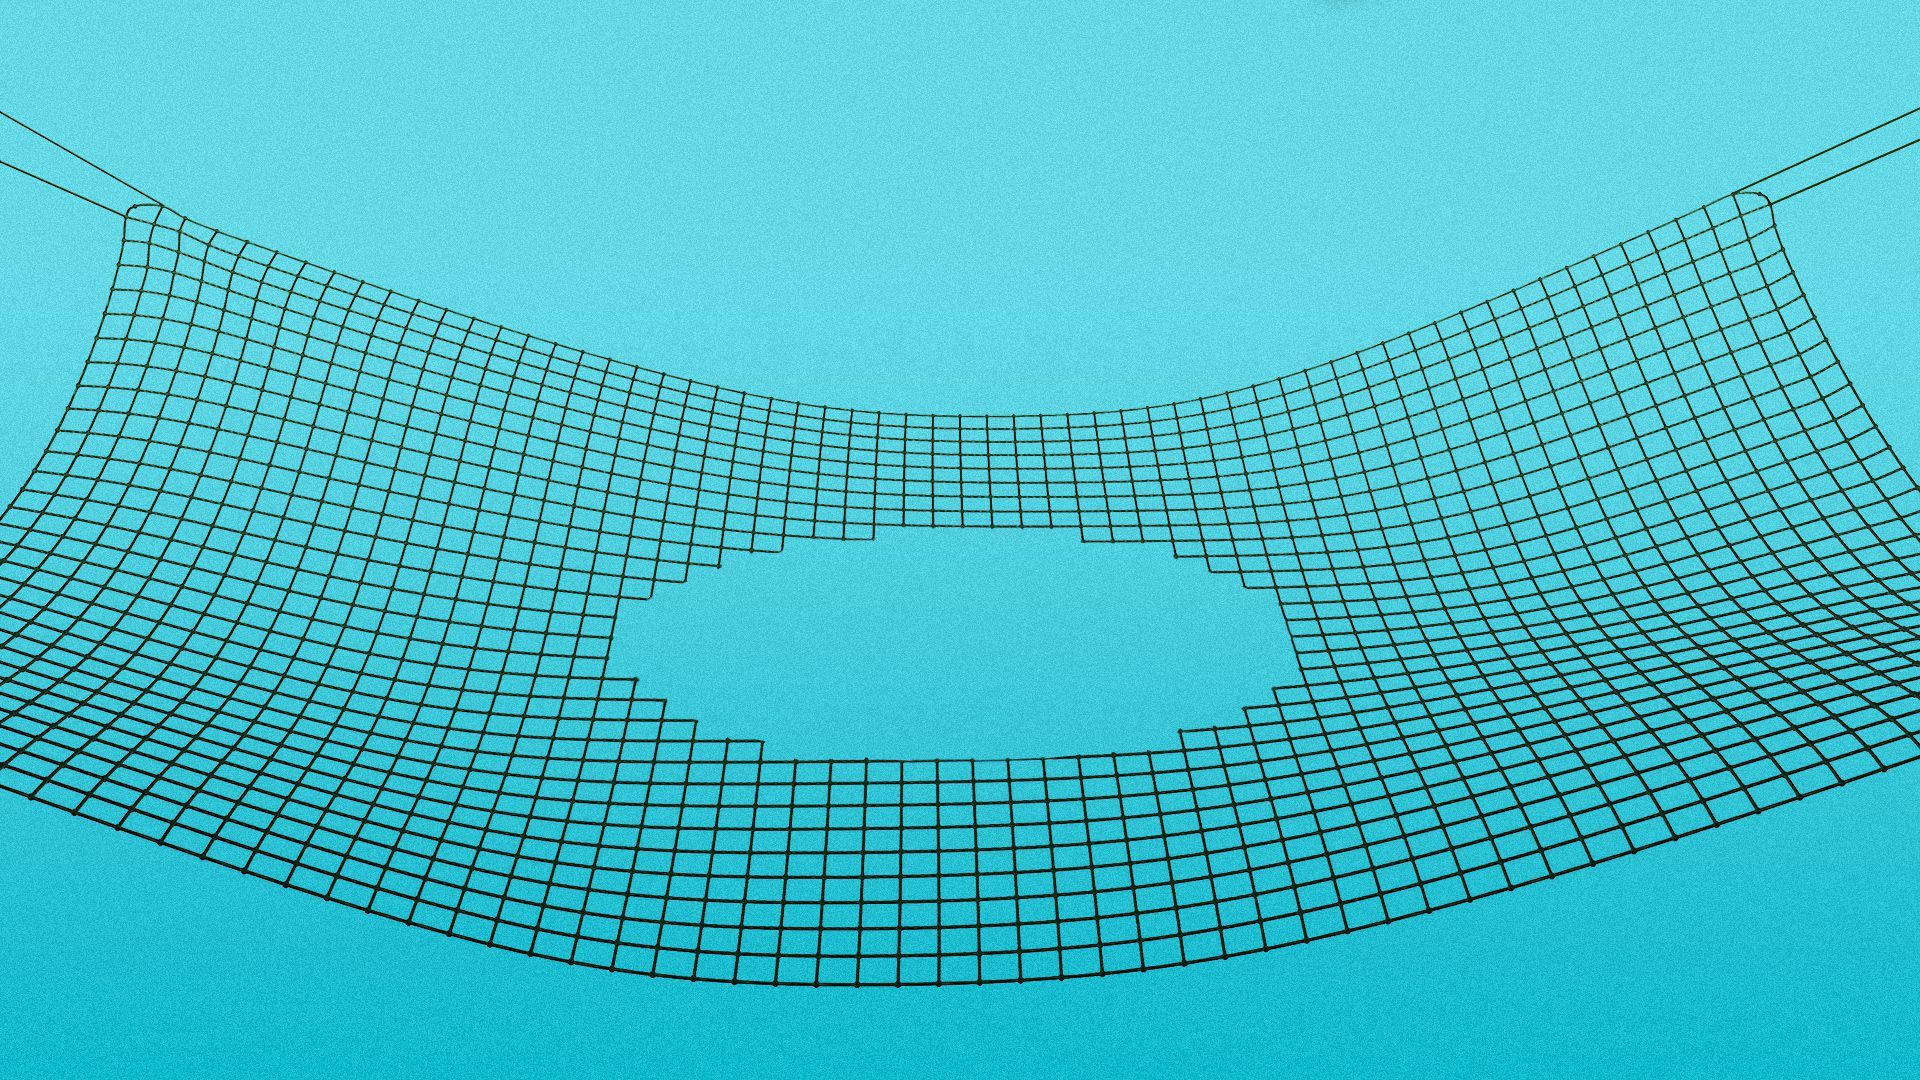 Illustration of a safety net with a hole in it.   